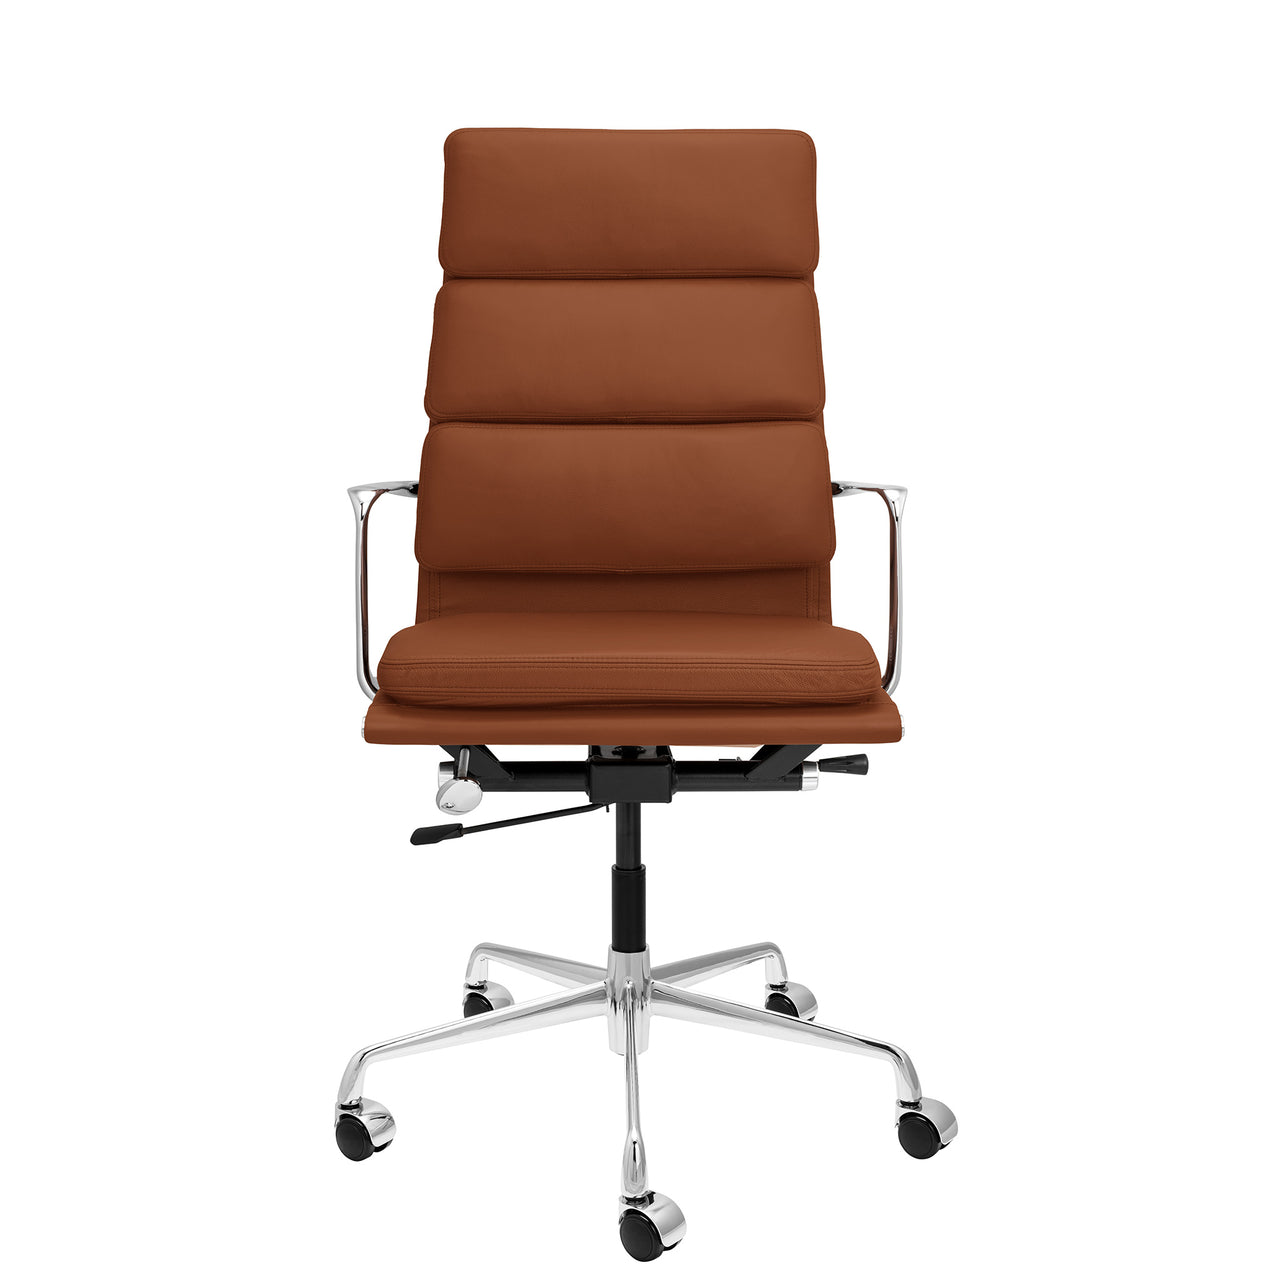 Pro Tall Back Soft Pad Management Chair (Brown Italian Leather)